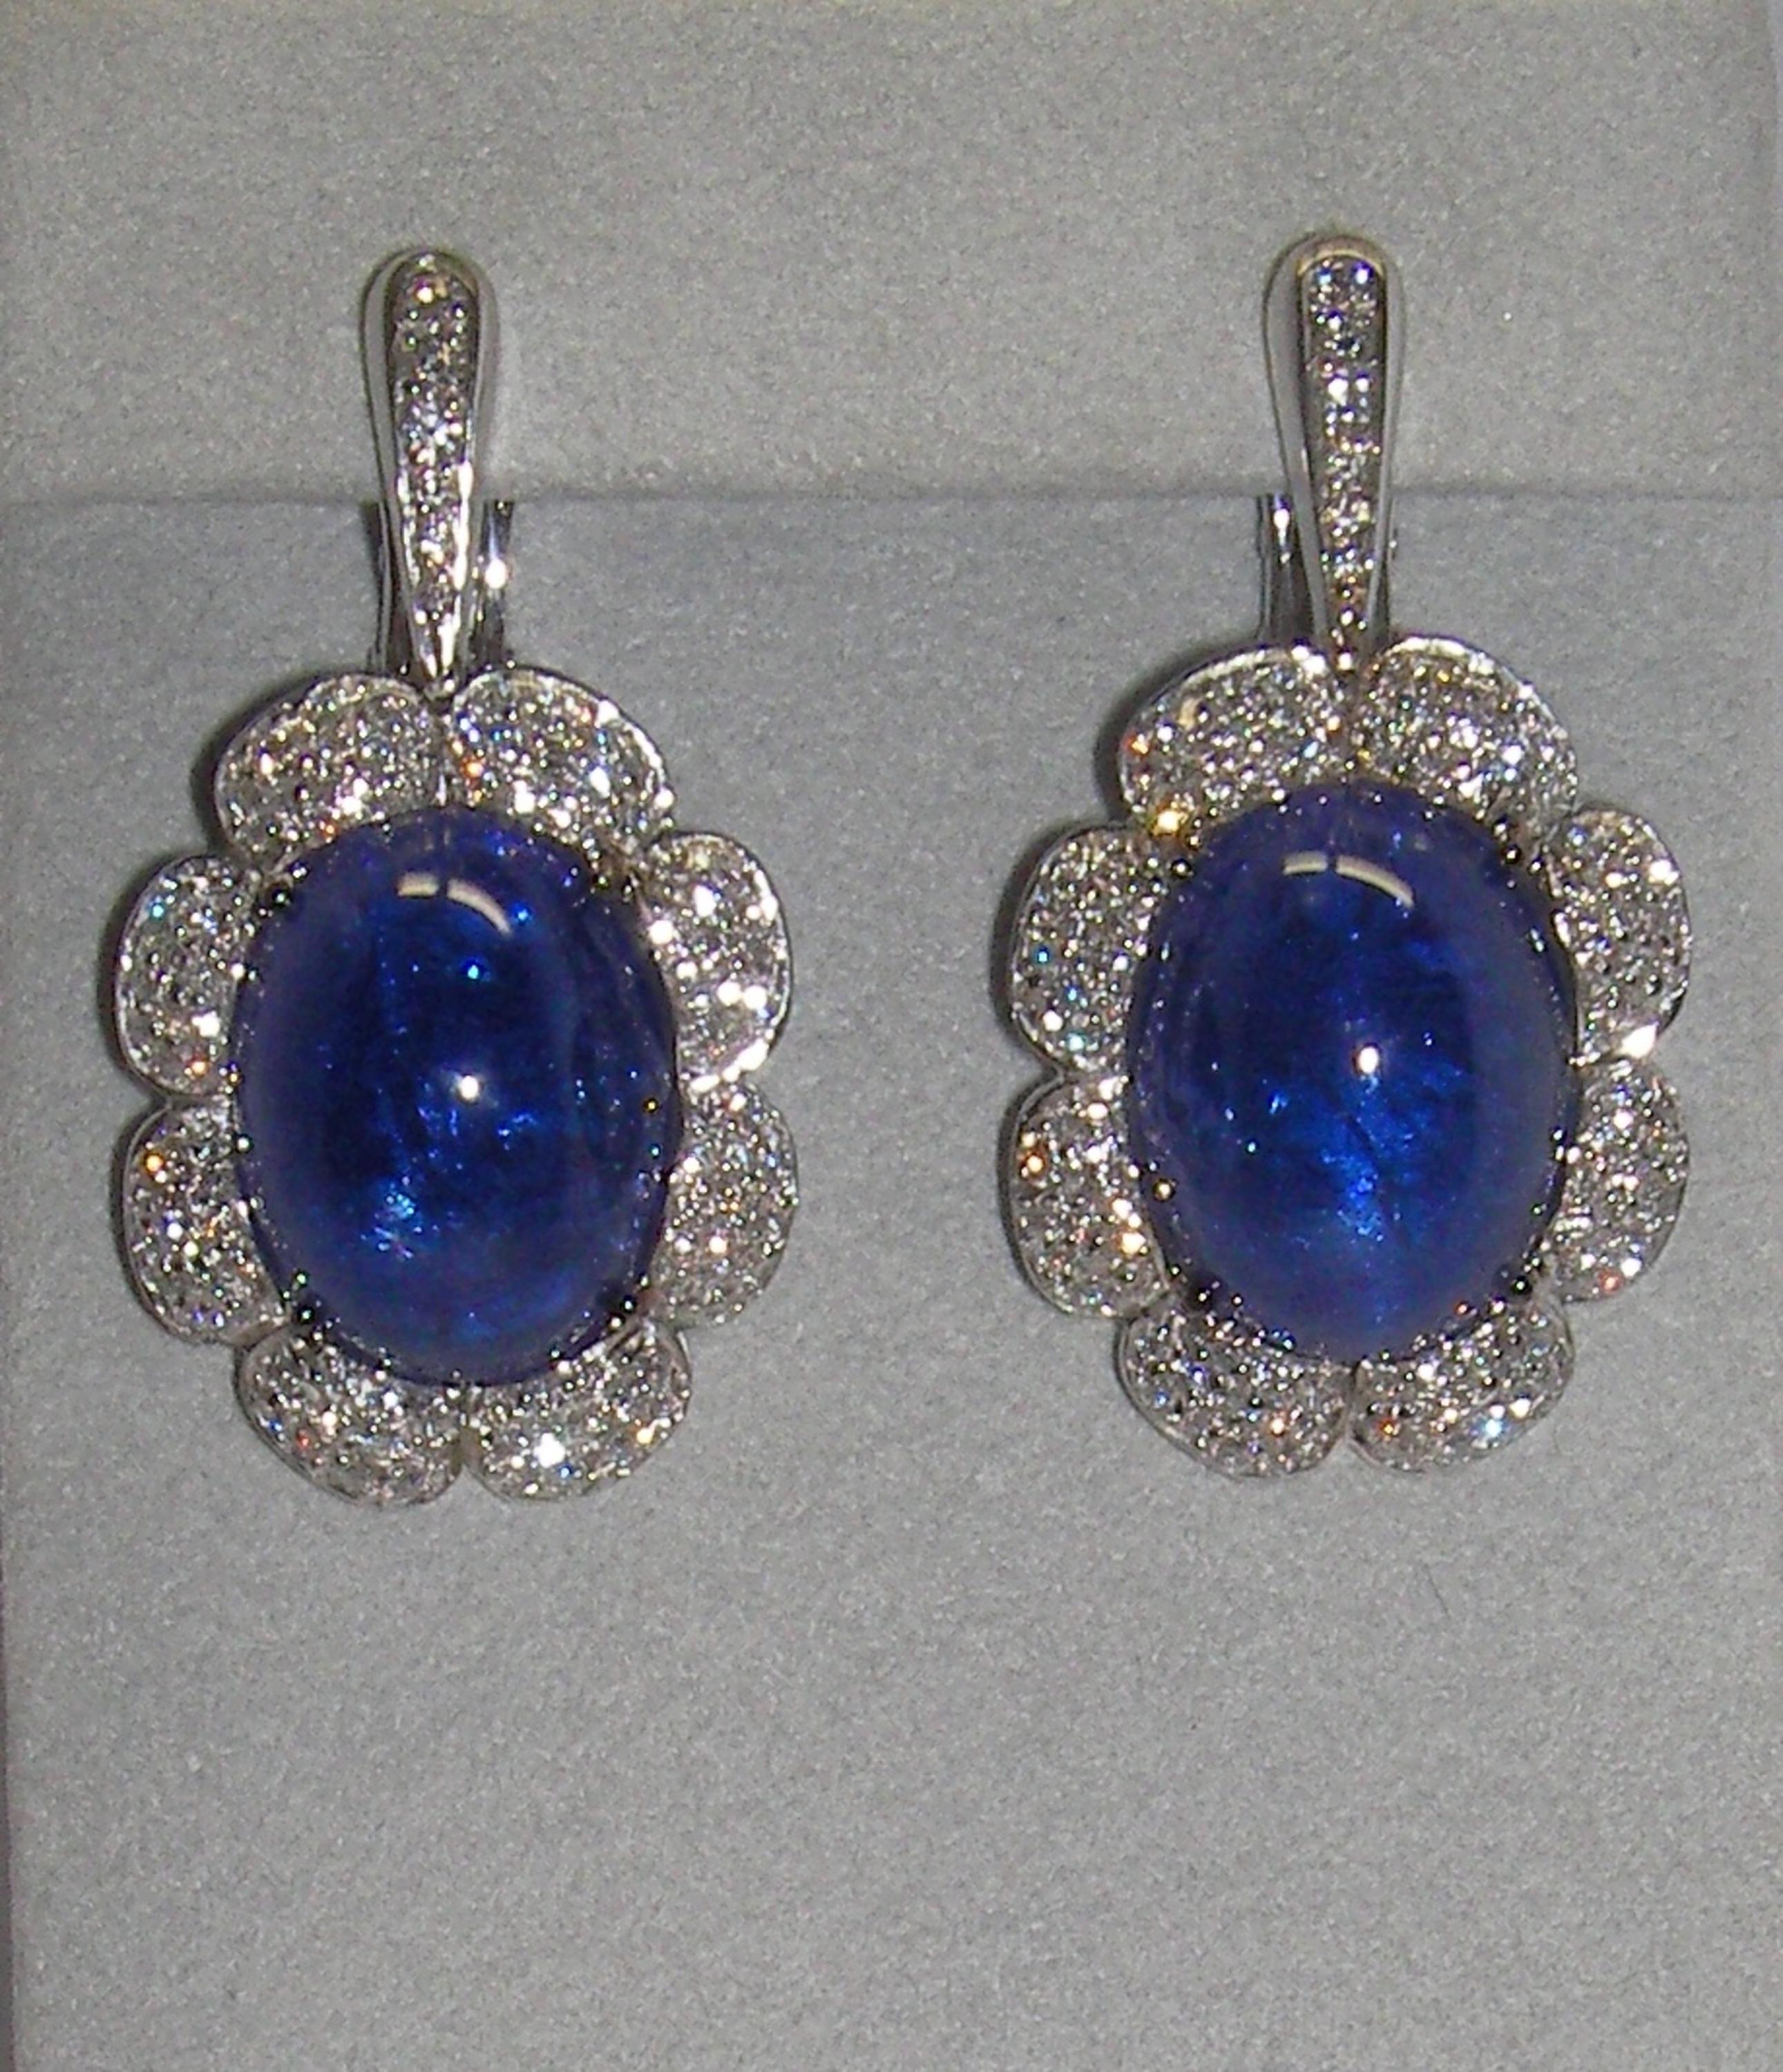 These stunning 18 Karat White Gold Drop Earrings full of Diamonds highlighting a Tanzanite oval shaped center stone on each earring. These earrings are a perfect compliment to our 18 Karat White Gold Diamond and Tanzanite Cocktail Ring and 18 Karat